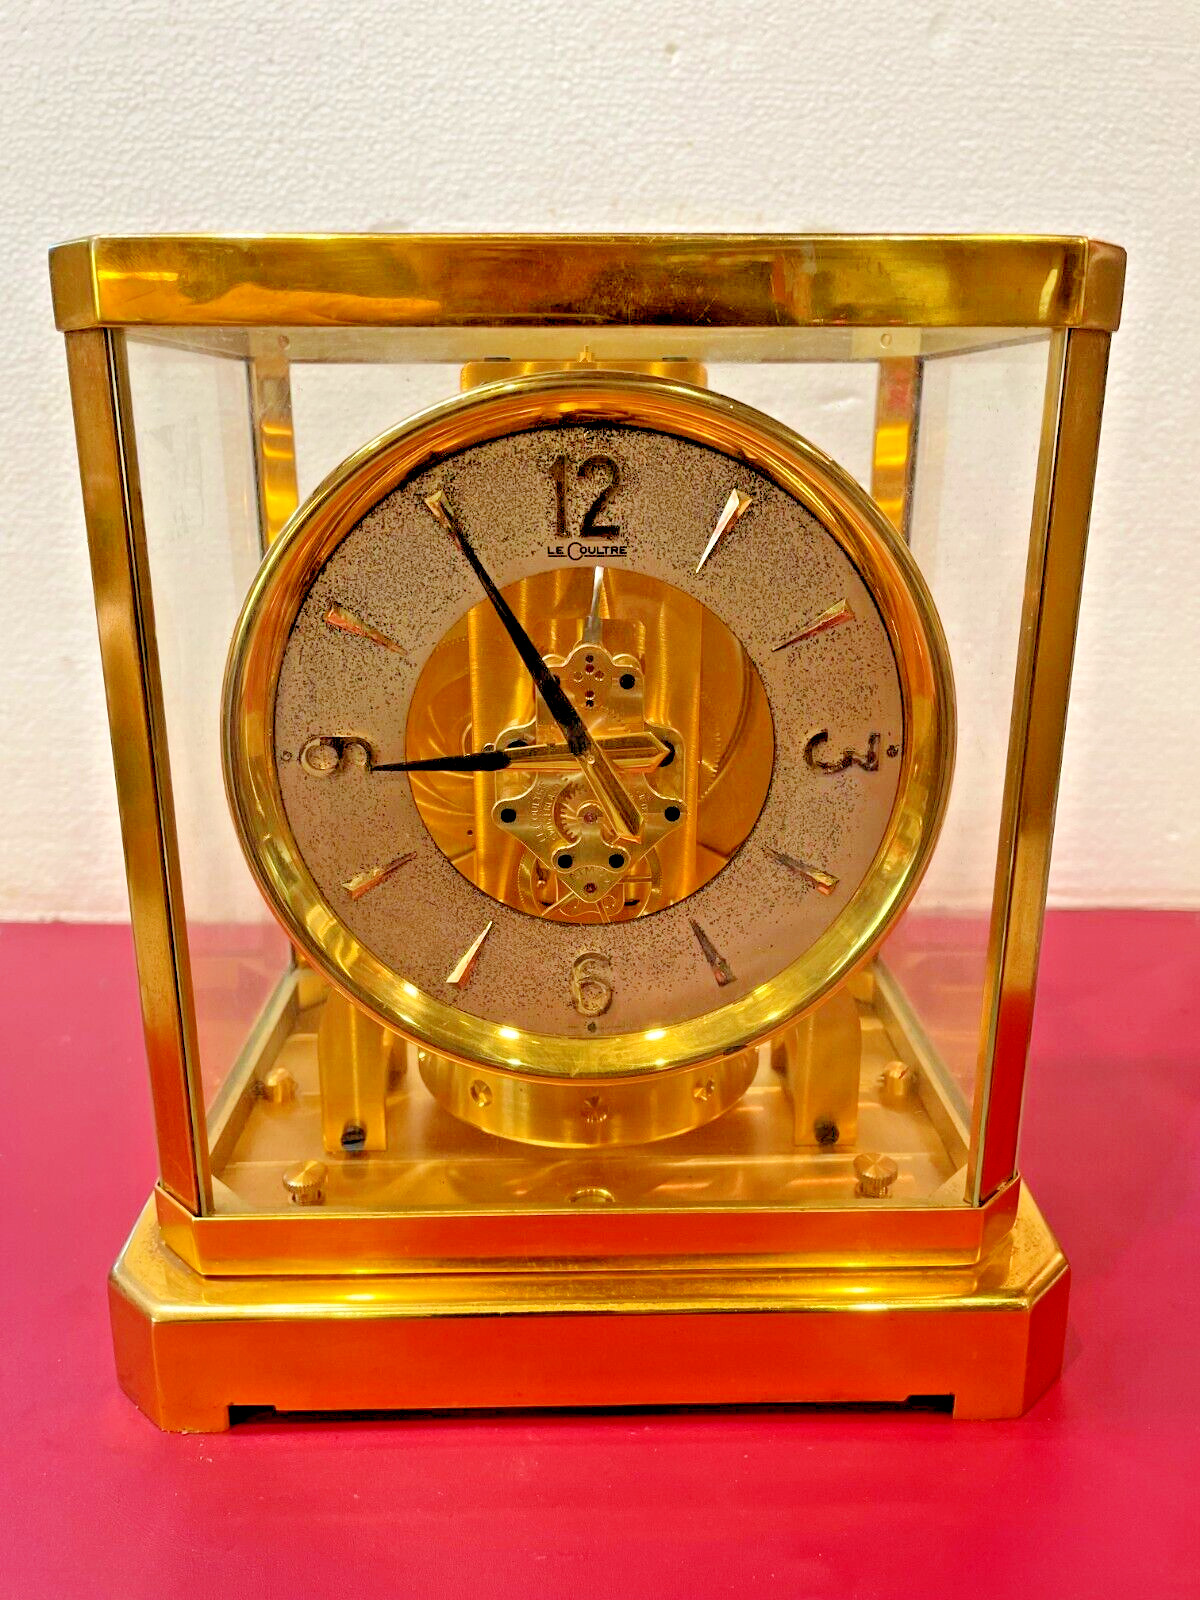 FULLY SERVICED 1950s JAEGER LECOULTRE ATMOS  MANTLE CLOCK#55XXX WORKING ONTIME